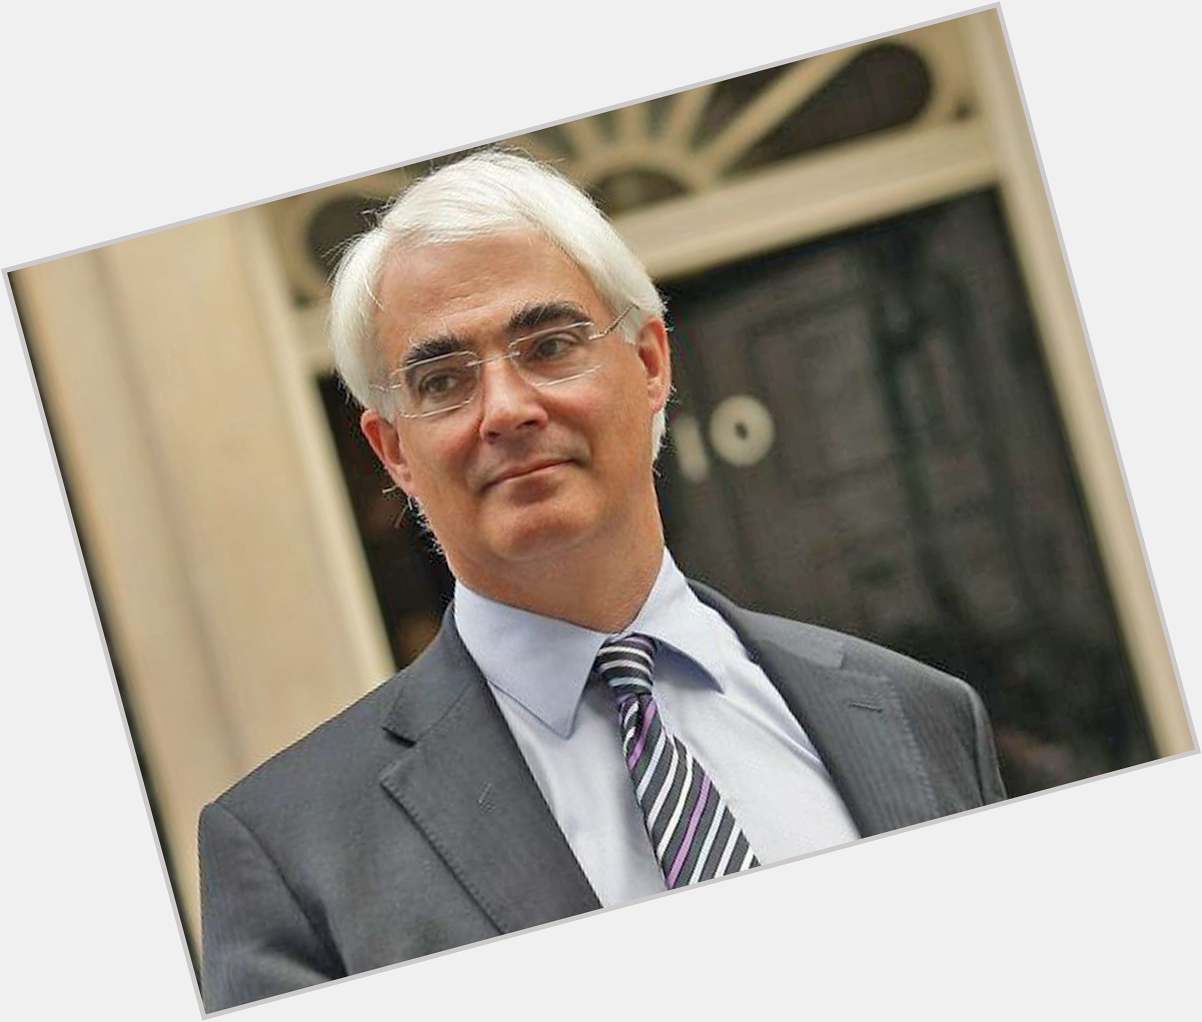 Https://fanpagepress.net/m/A/Alistair Darling New Pic 1